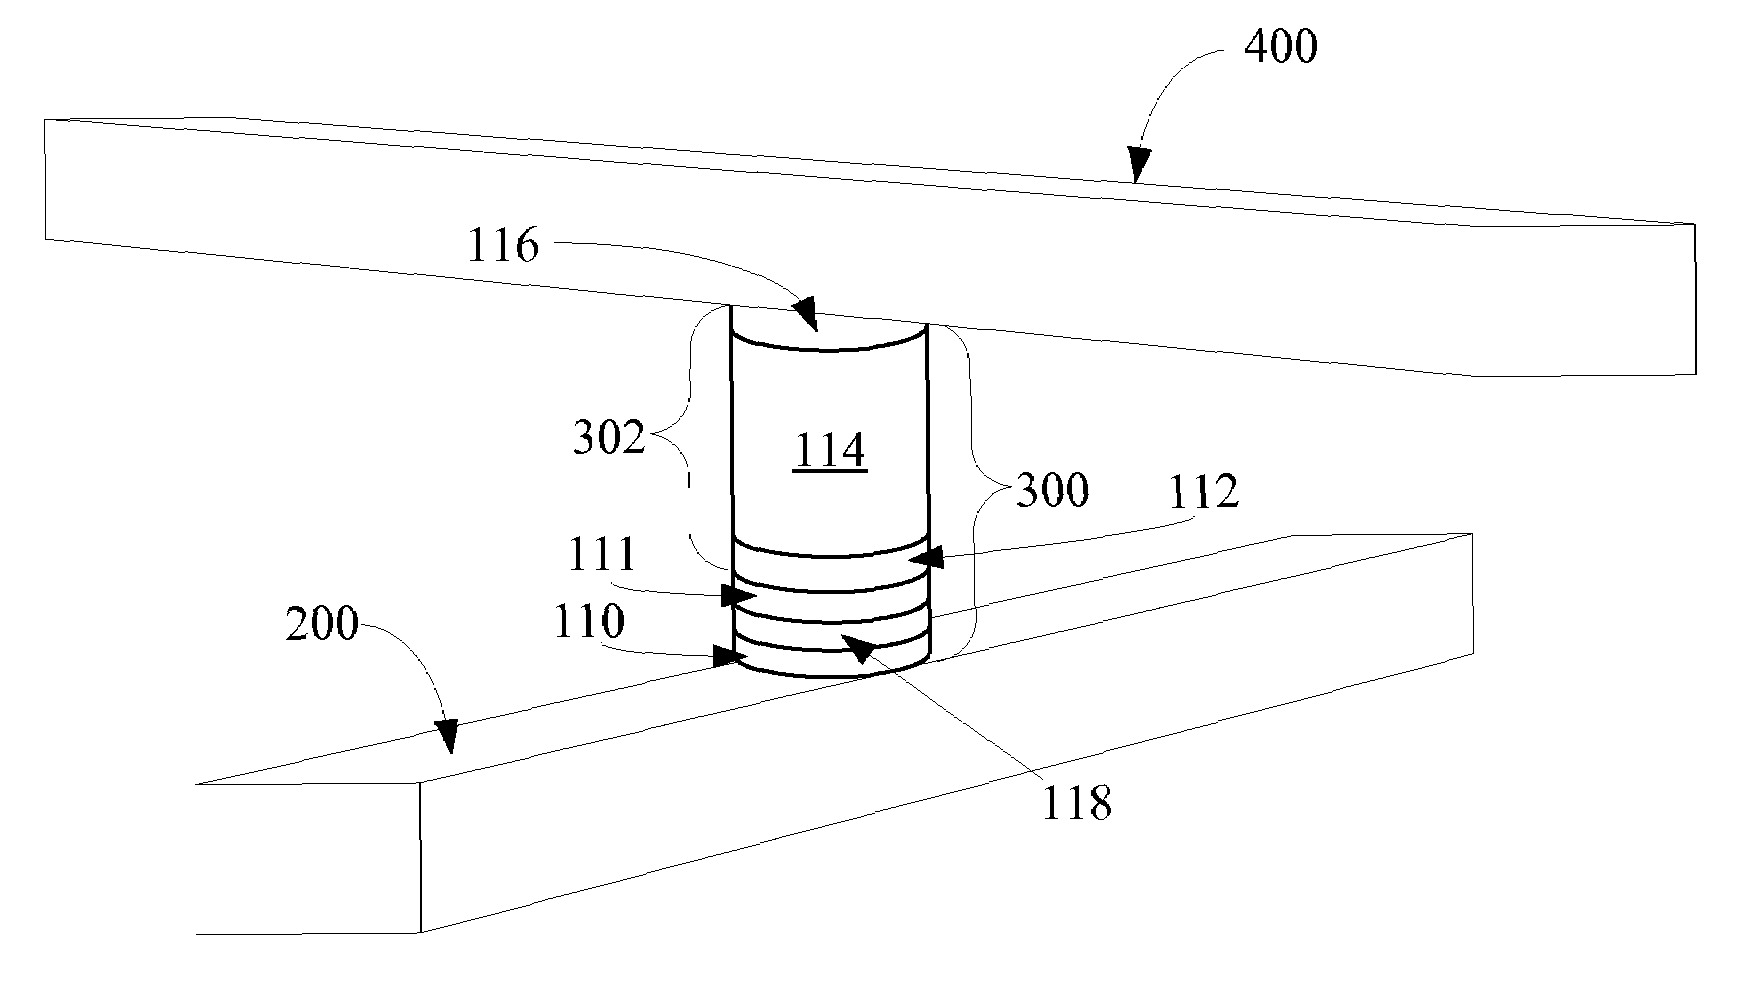 Large array of upward pointing p-i-n diodes having large and uniform current